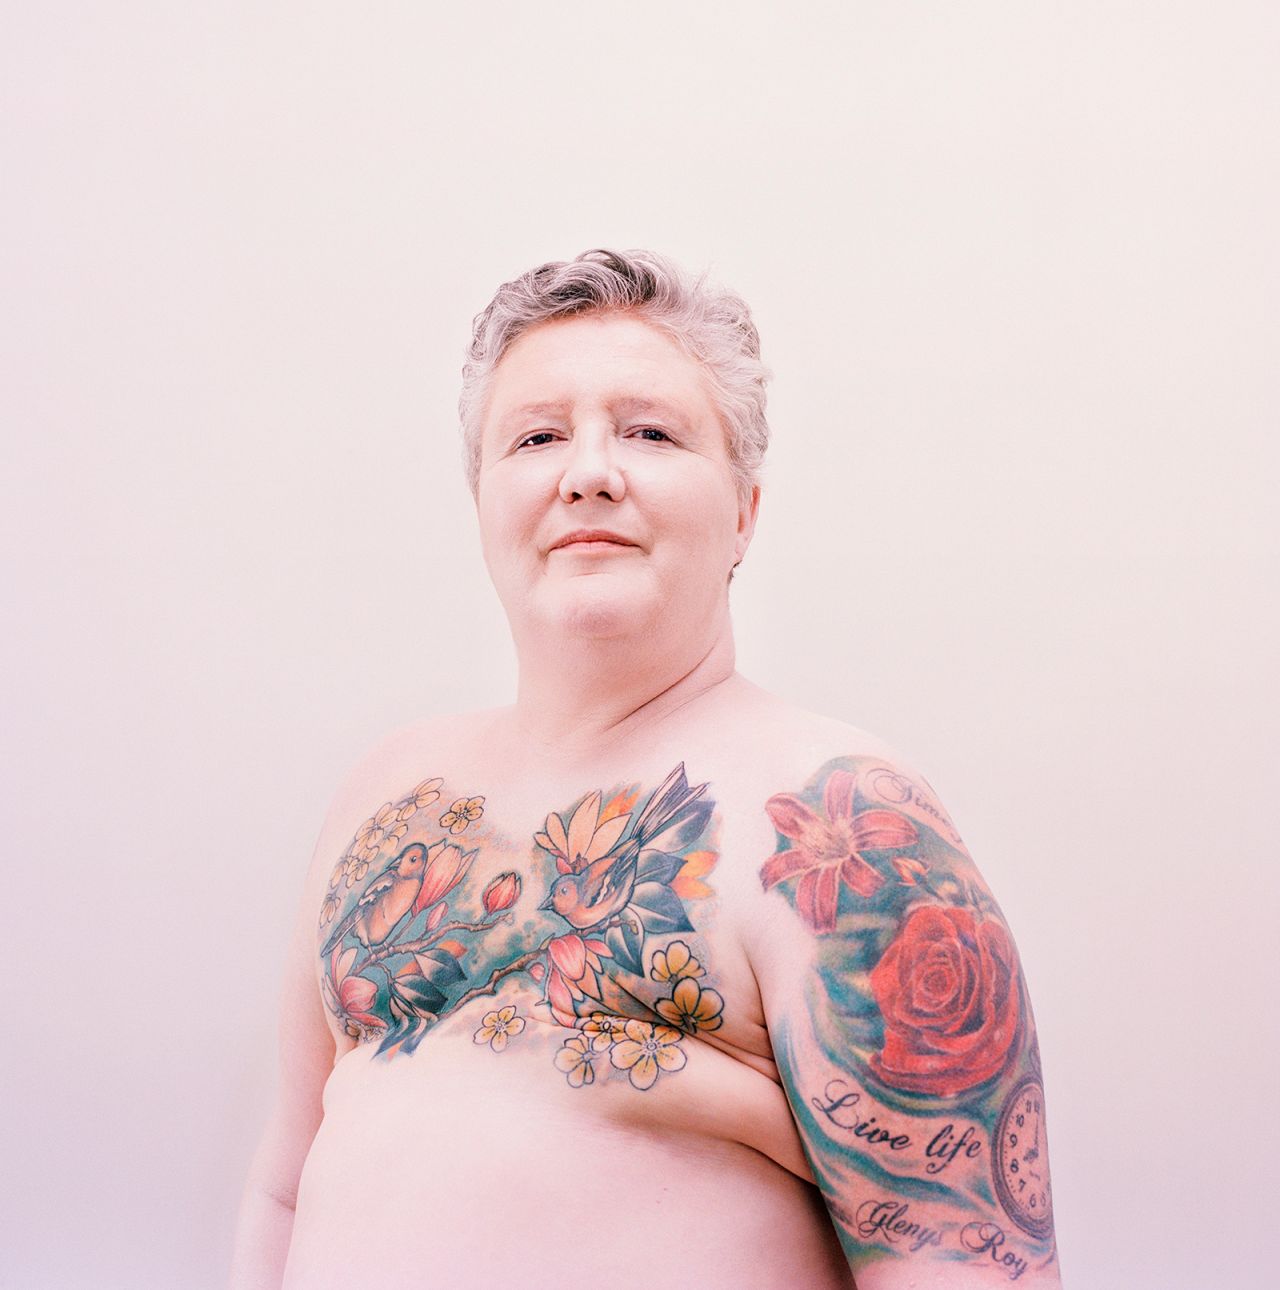 "All my tattoos do mark different milestones in my life," Elaine told Peters. "Every one is for something. My half sleeve is the story of my family: representing my children, the children we lost, my husband. (I have a) daffodil because I'm from Wales and a shamrock because my husband is from Ireland."